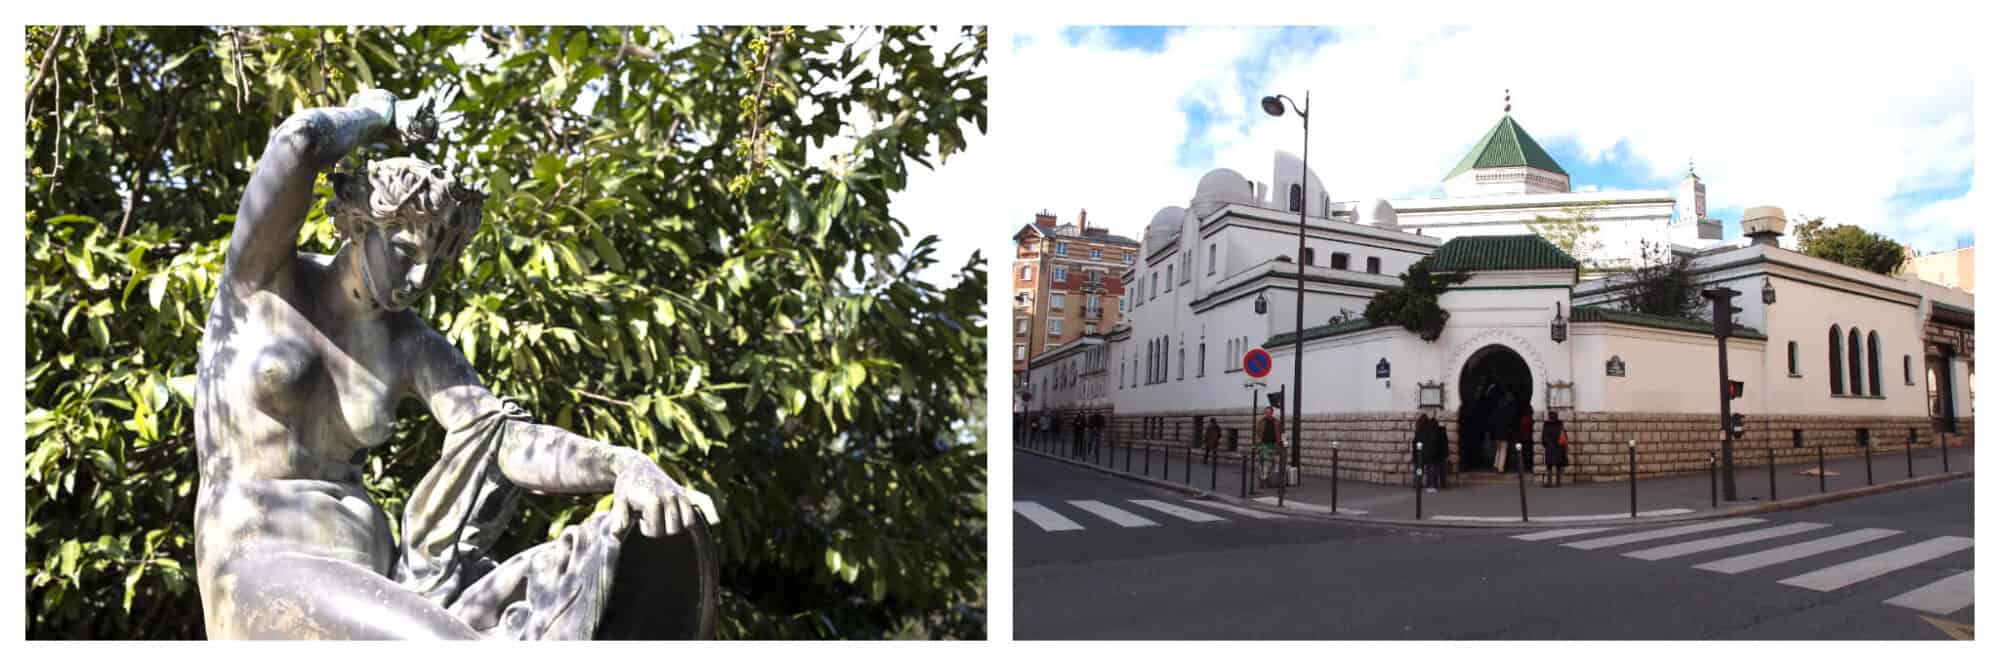 Left: A stone statue of a person with the shadows of leaves on it on a sunny day in the Jardin de Plantes in Paris, Right: The front of the Grande Mosquée de Paris on a sunny day